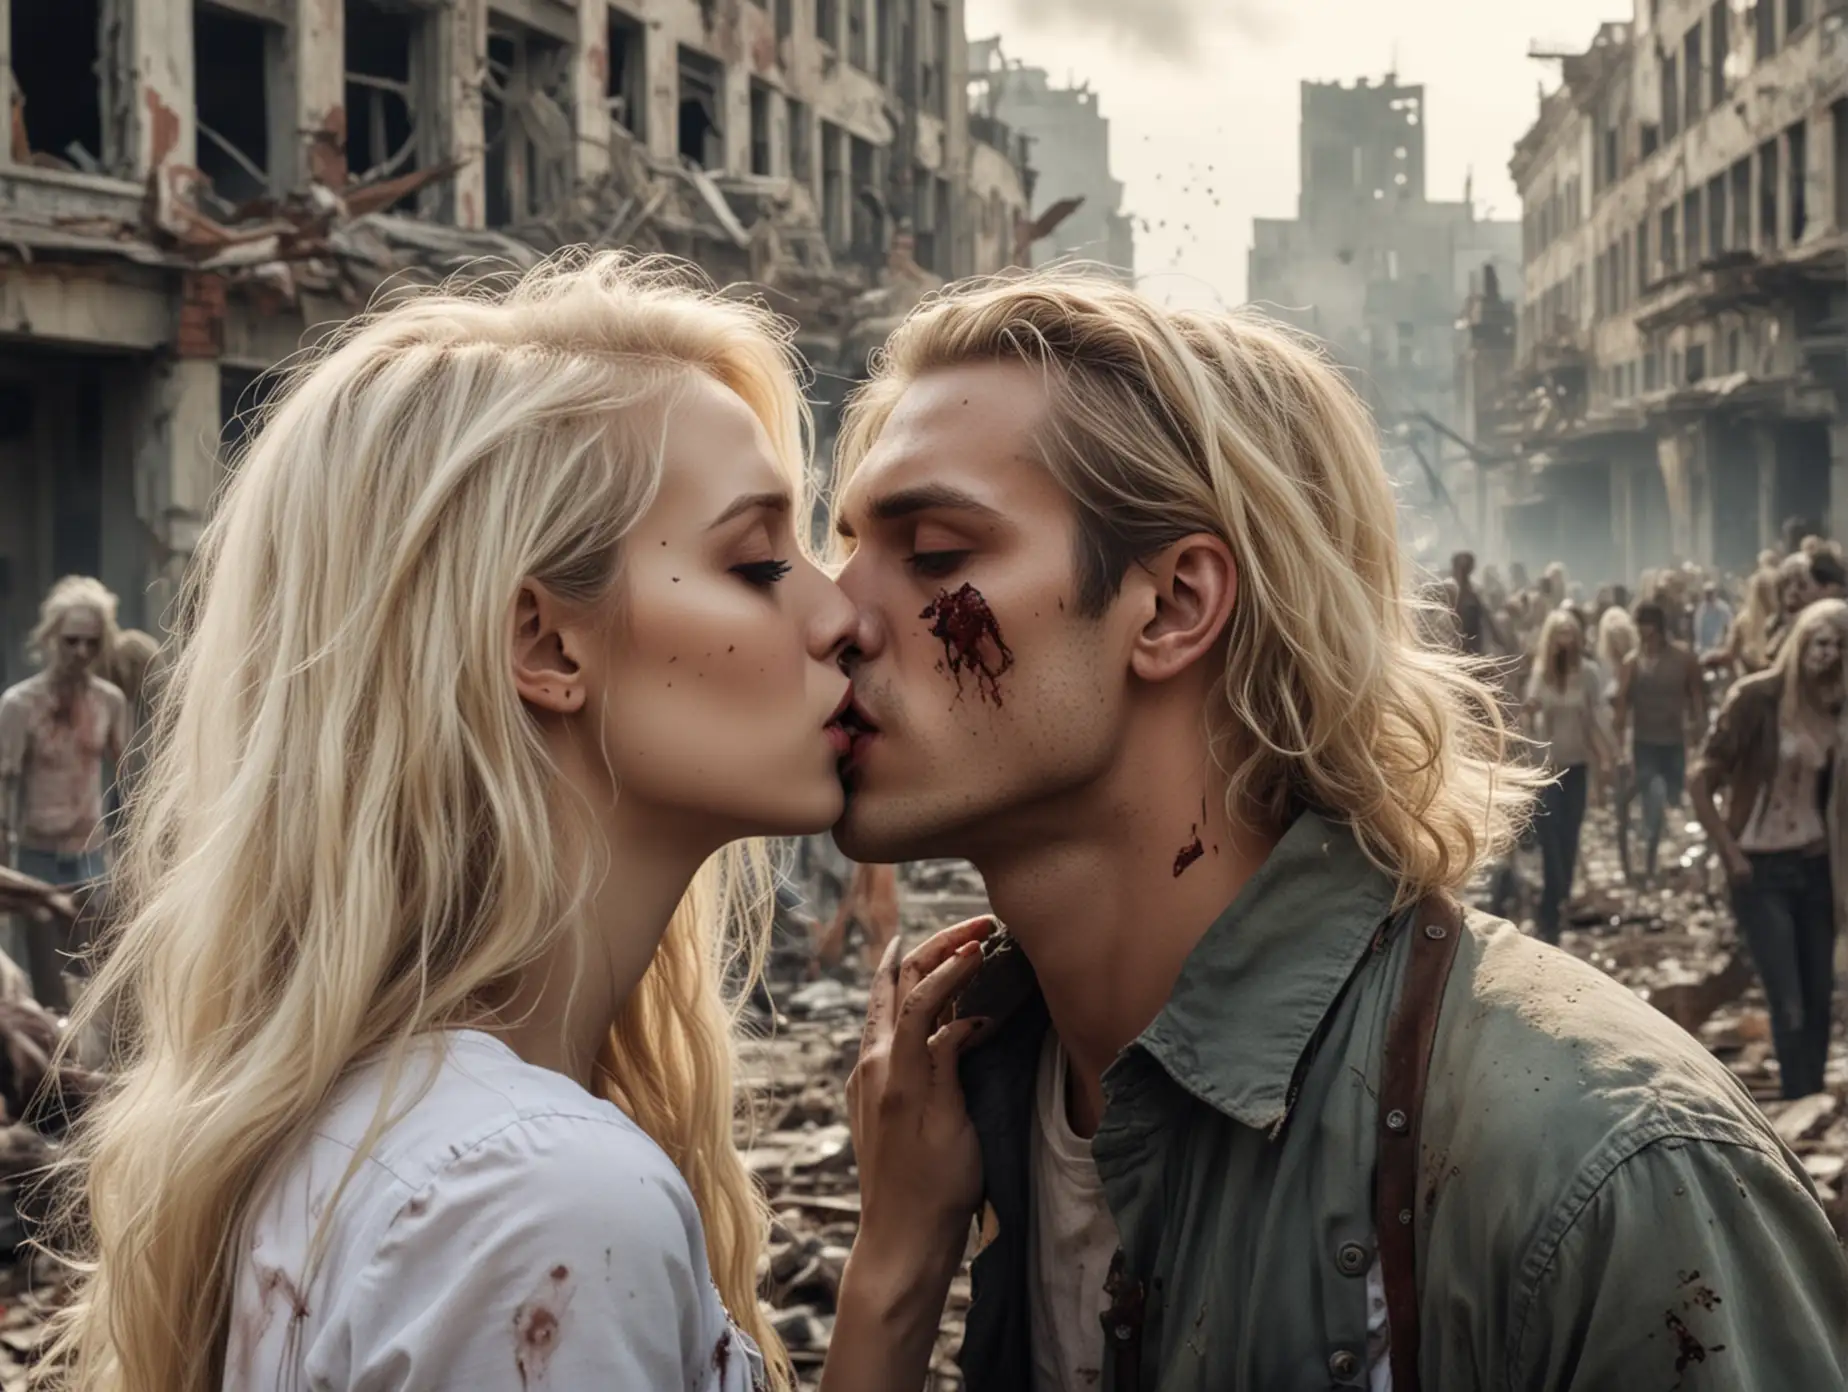 A blonde girl kisses a blonde man against the background of zombies and a destroyed city